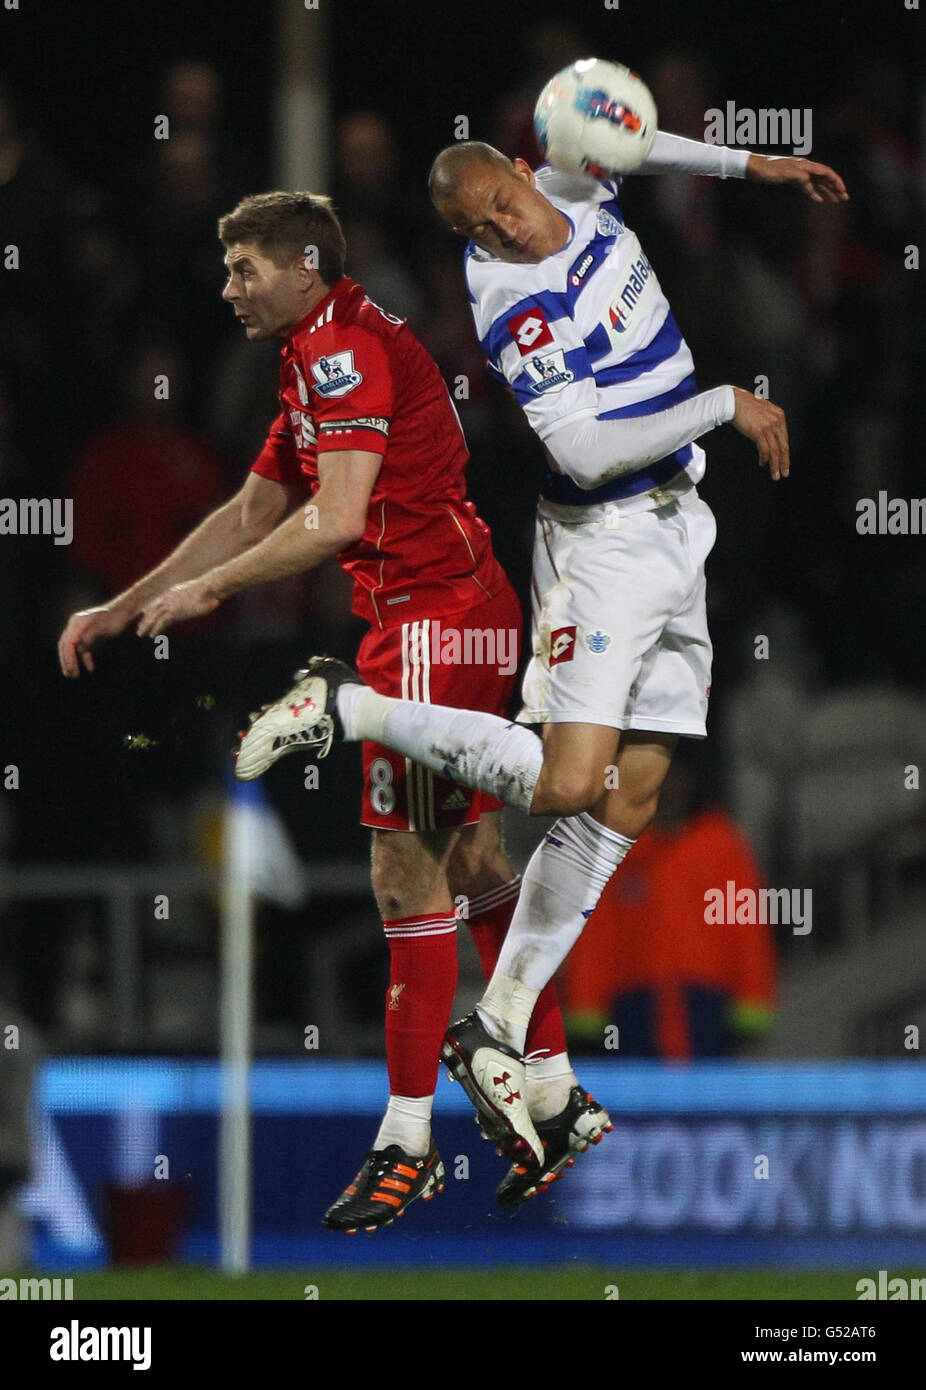 Queens Park Rangers' Bobby Zamora (right) wins the header beating Liverpool's Steve Gerrard during the Barclays Premier League match at Loftus Road, London. Stock Photo